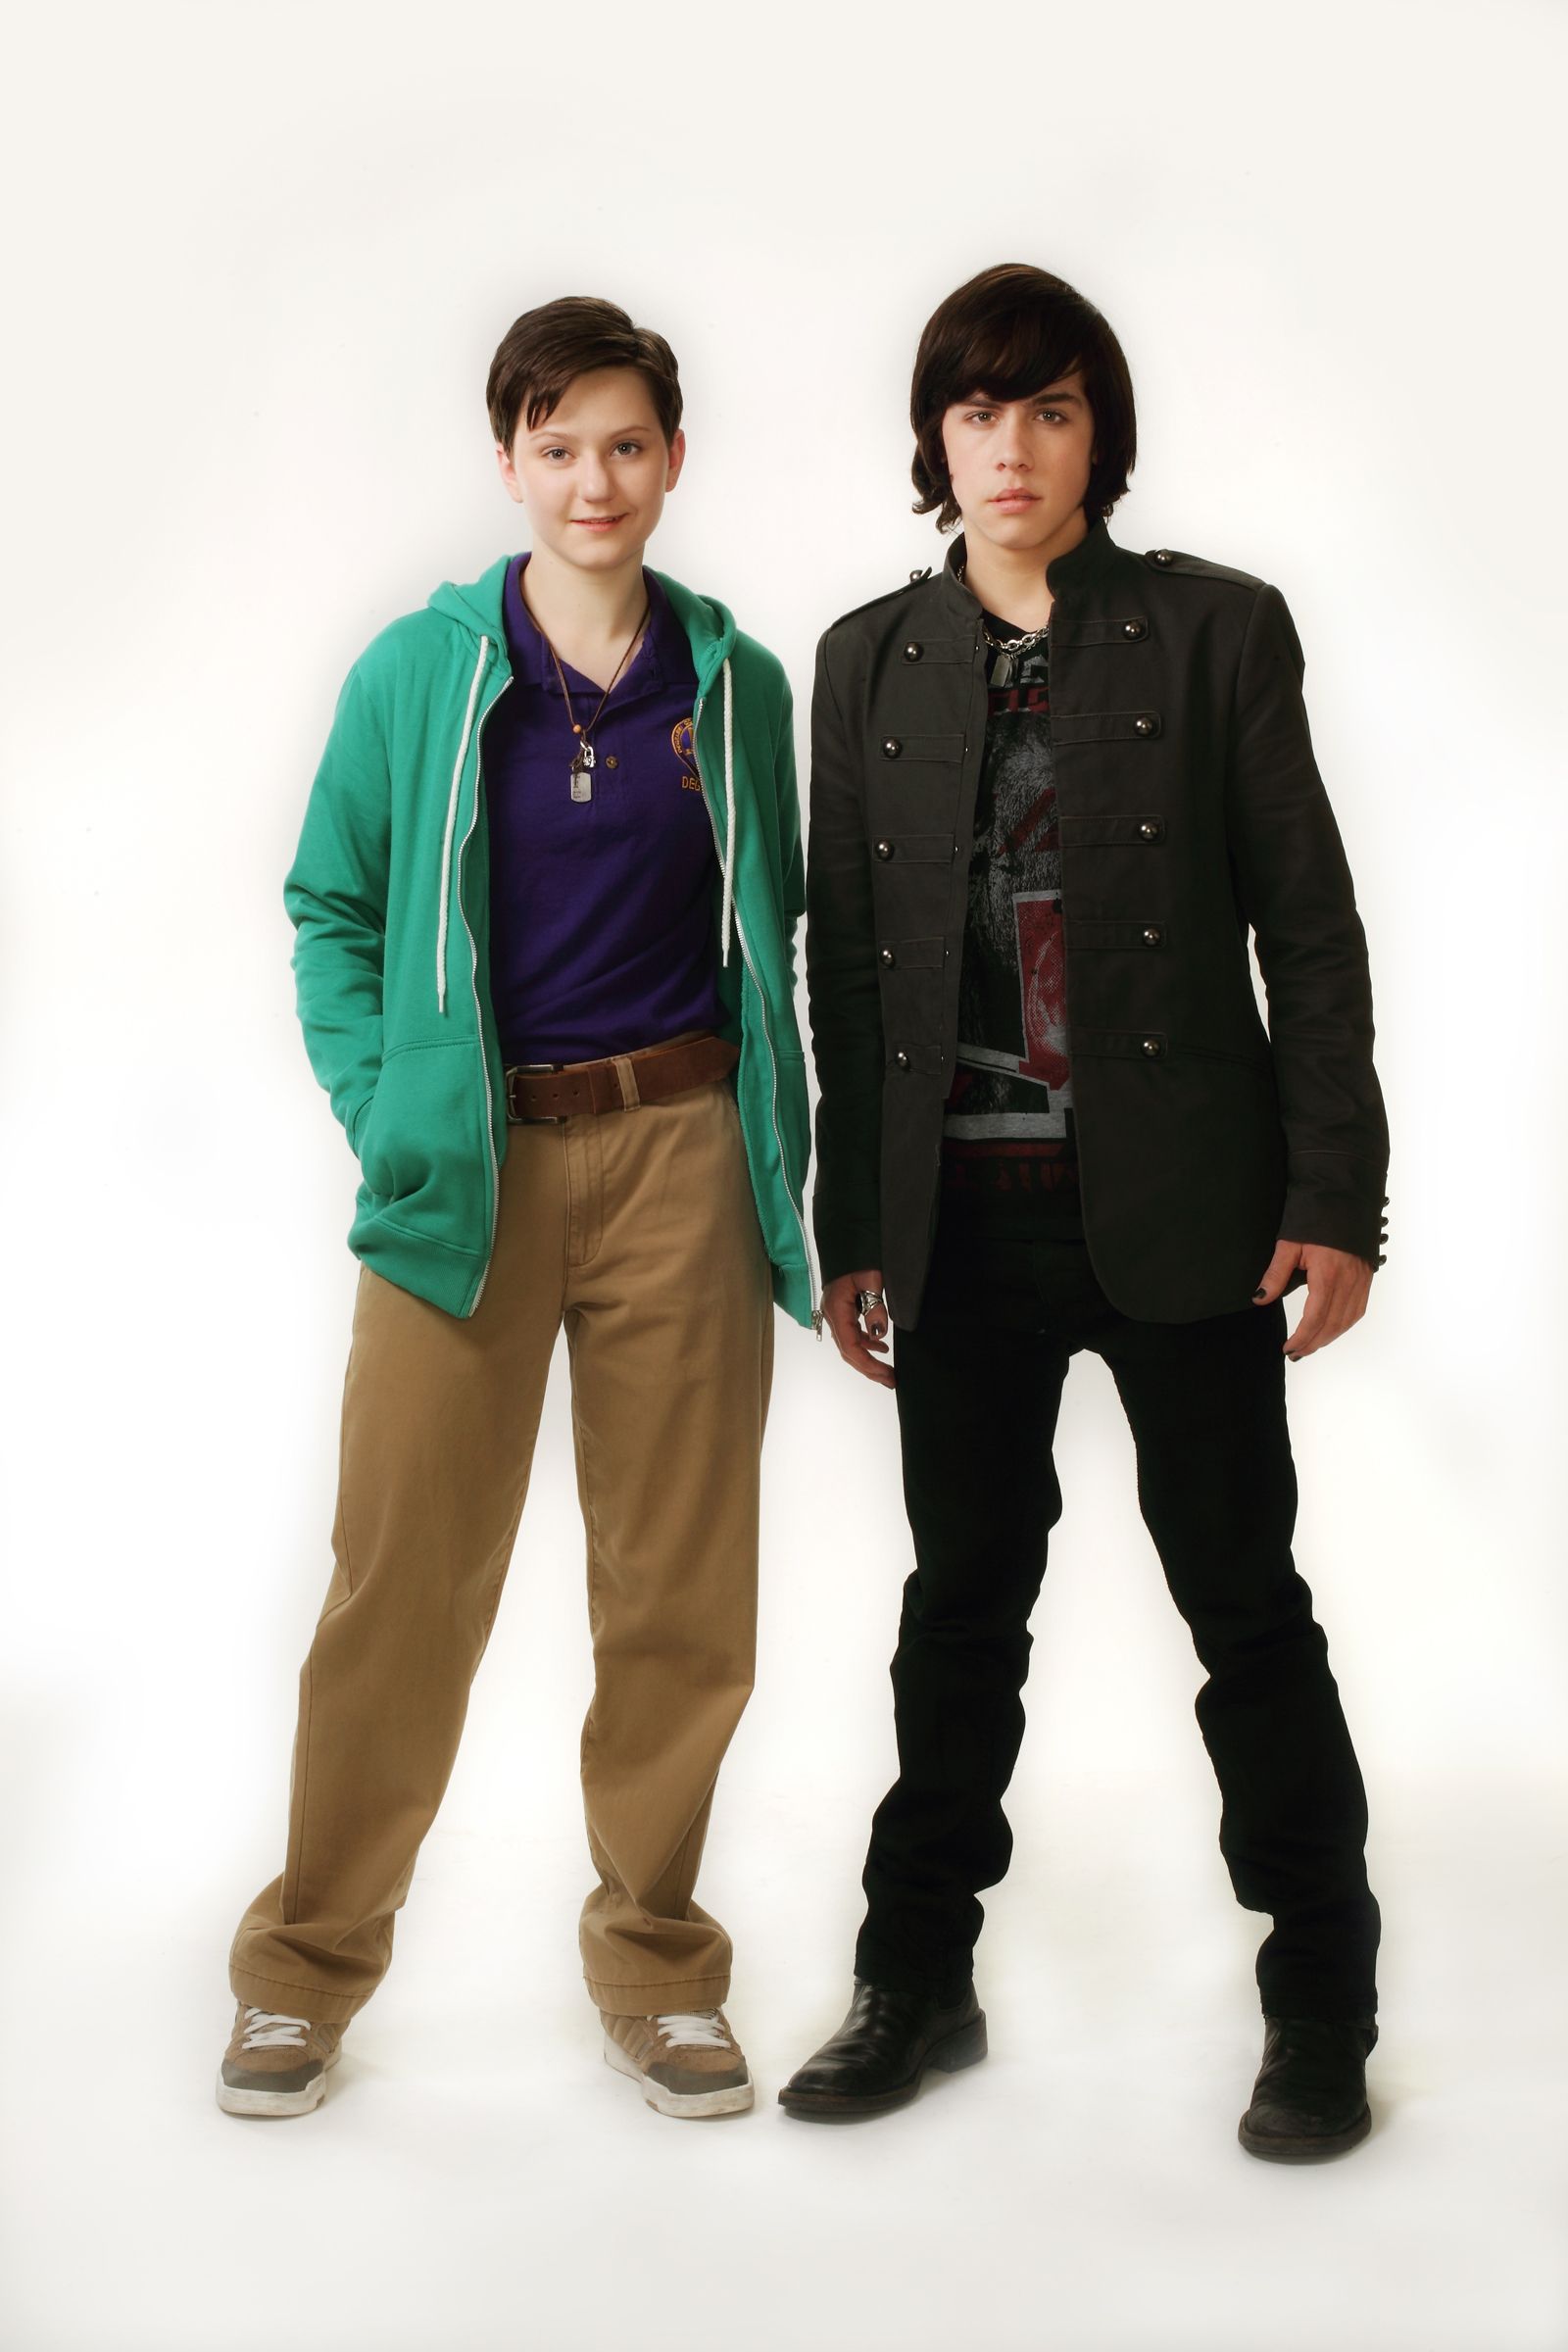 More Promotional Picture for Degrassi Season 11